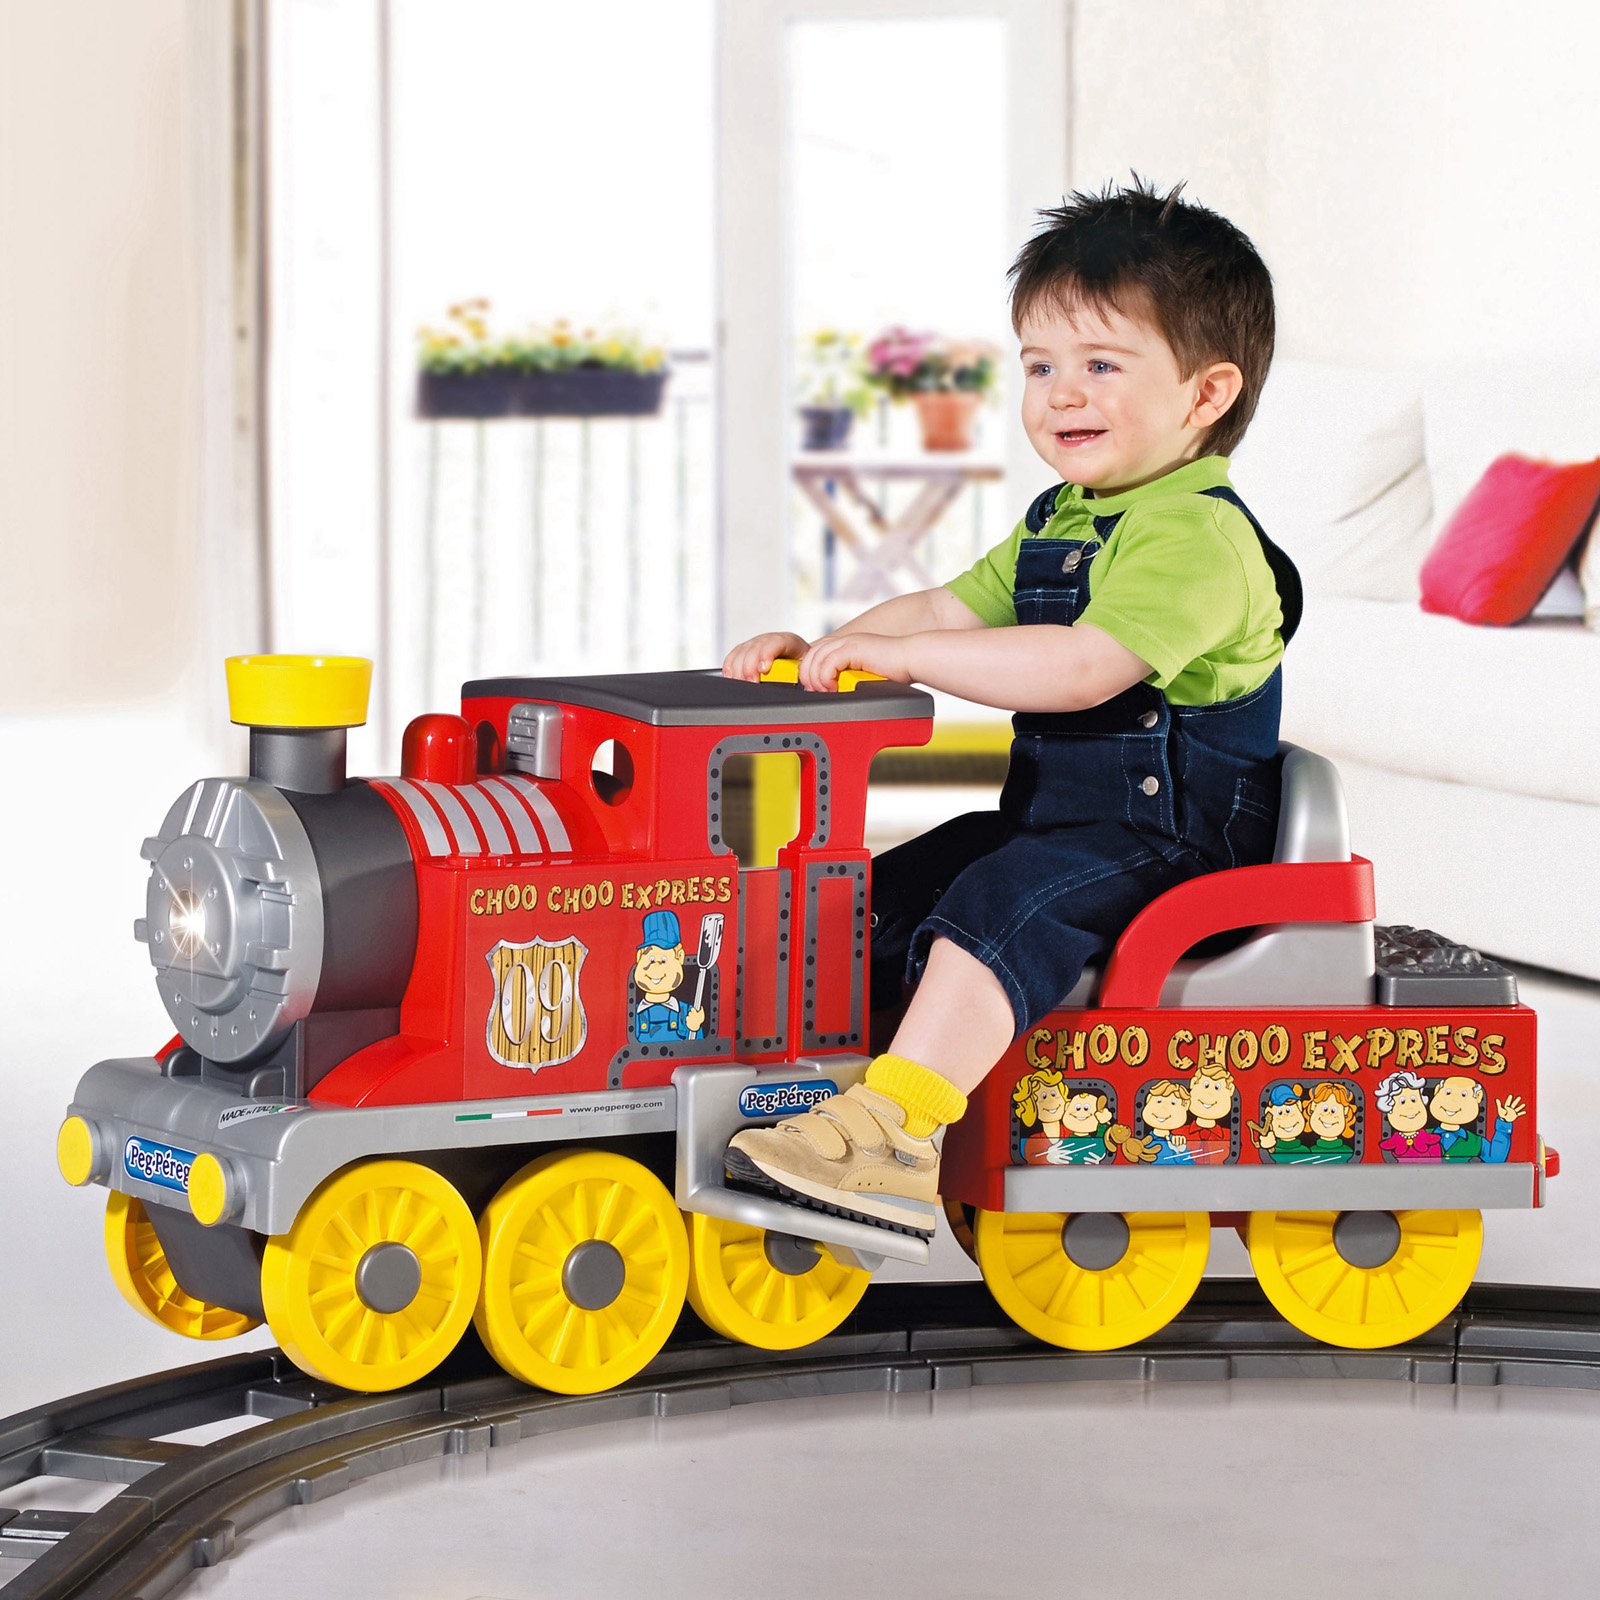 Singapore Toy Rental: Train Themed Party Toy Packages 